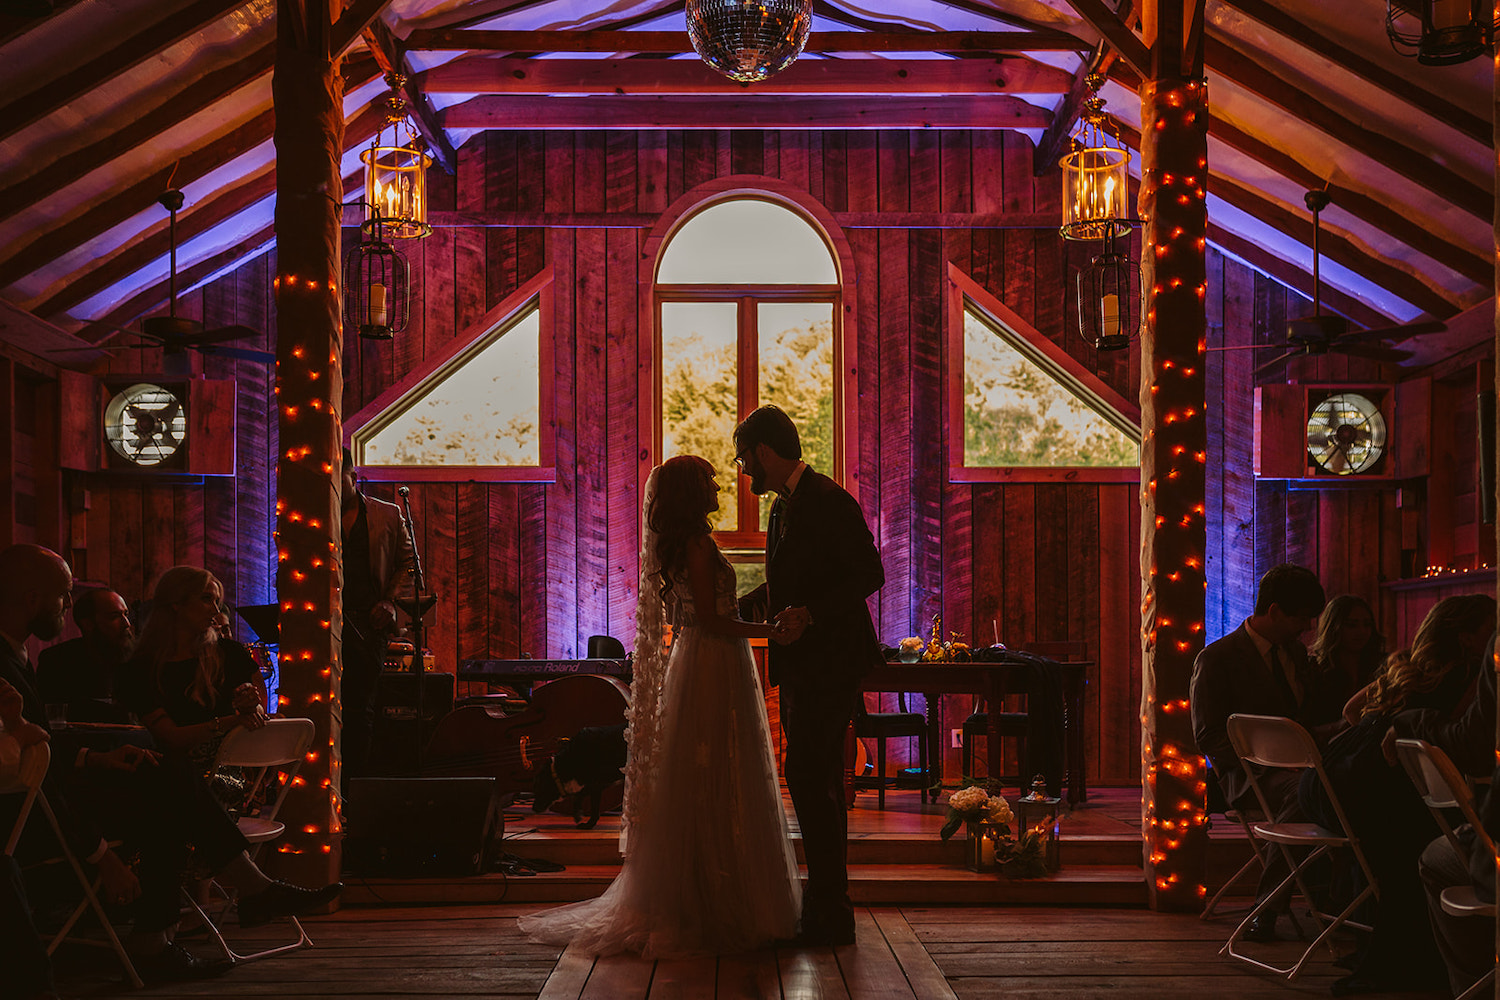 bride and groom share their first dance in a dimly lit barn interior